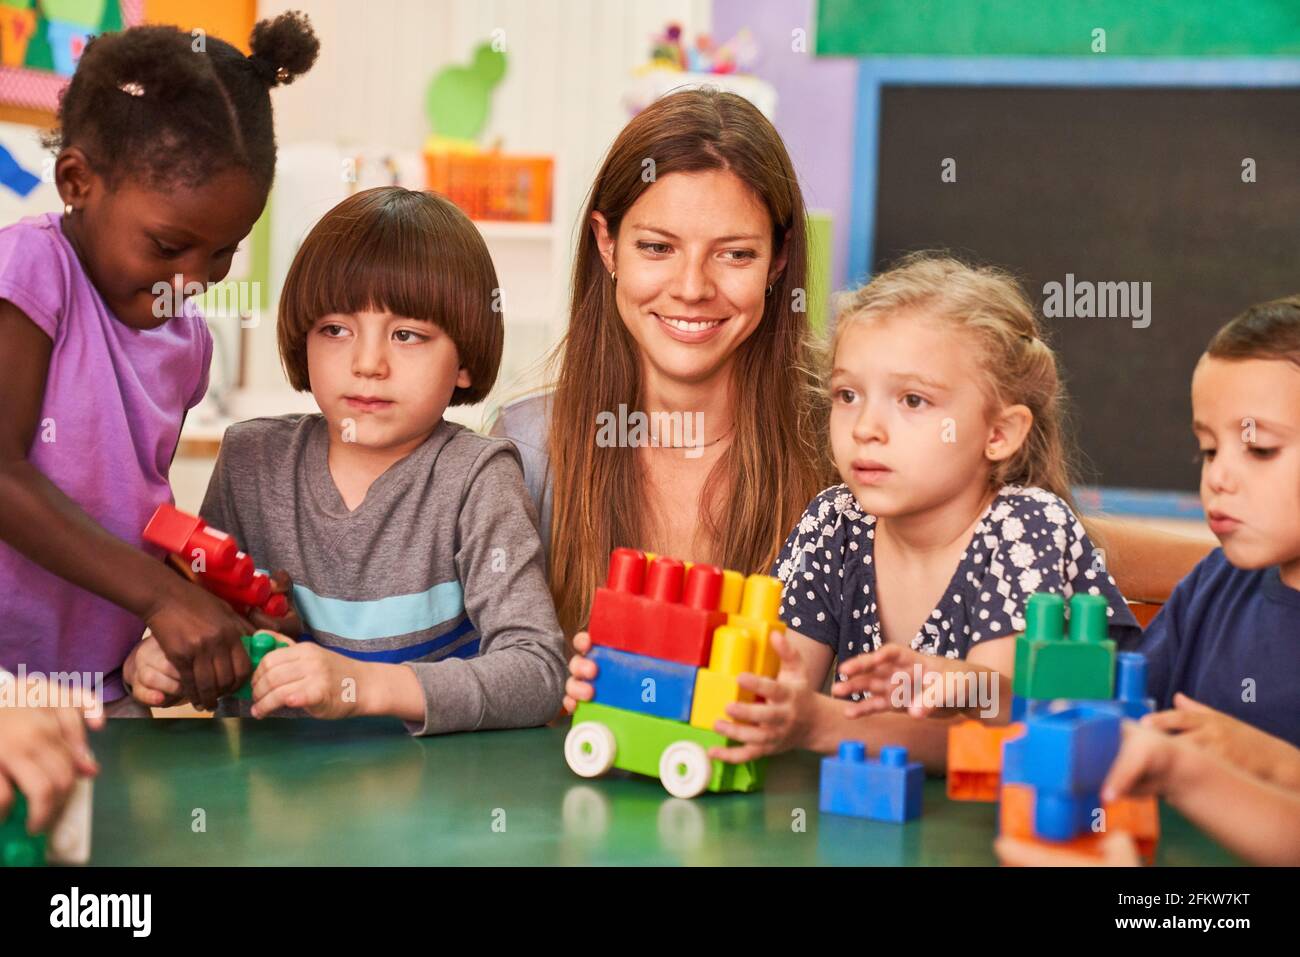 Children play together with colorful building blocks in daycare or after-school care center with an educator Stock Photo